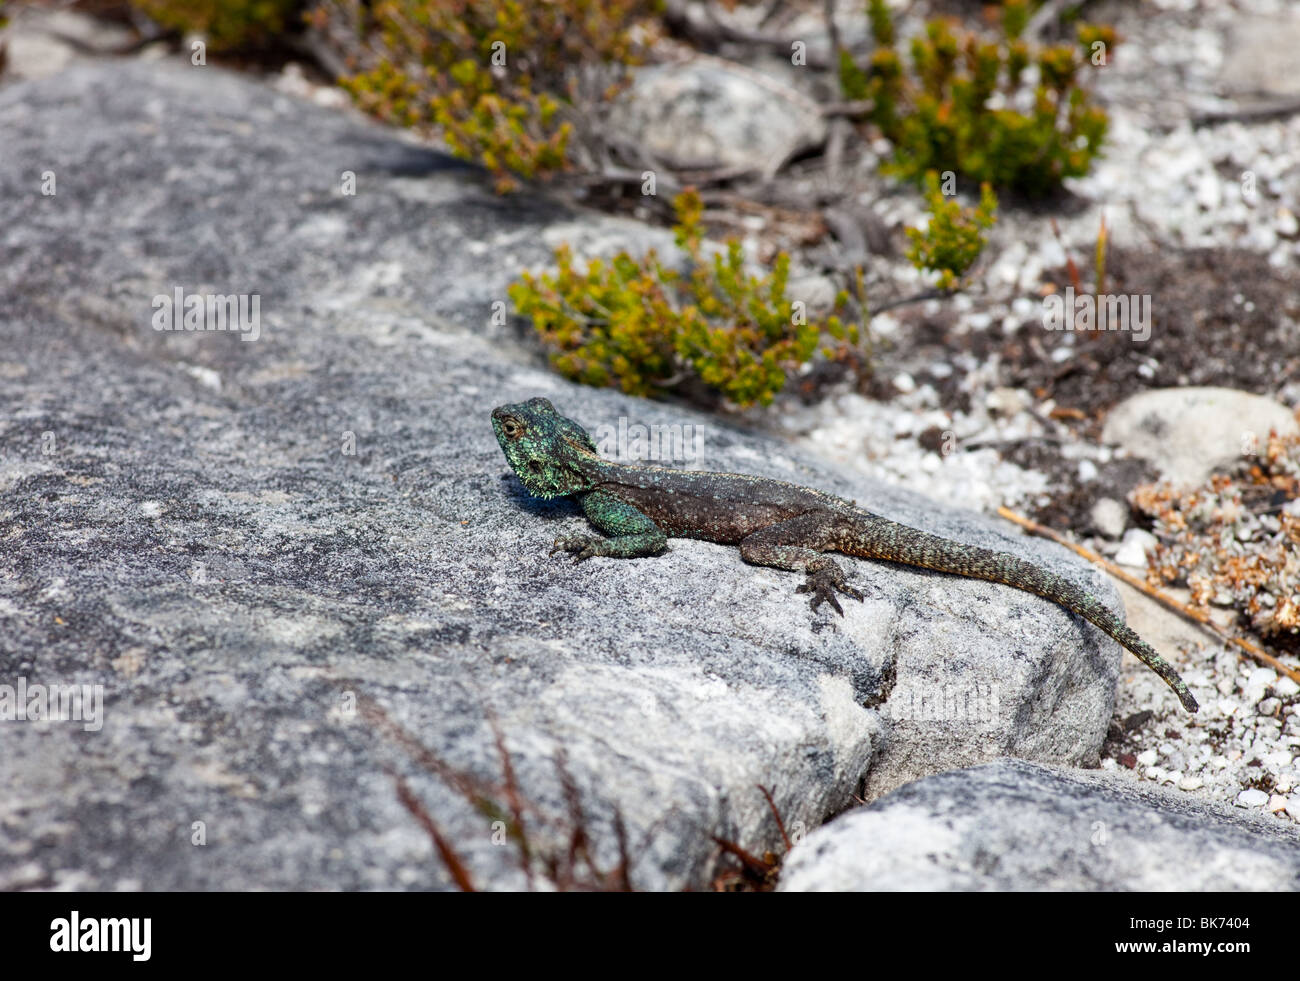 Close-up of a Agama on the plateau of Table mountain, South Africa Stock Photo